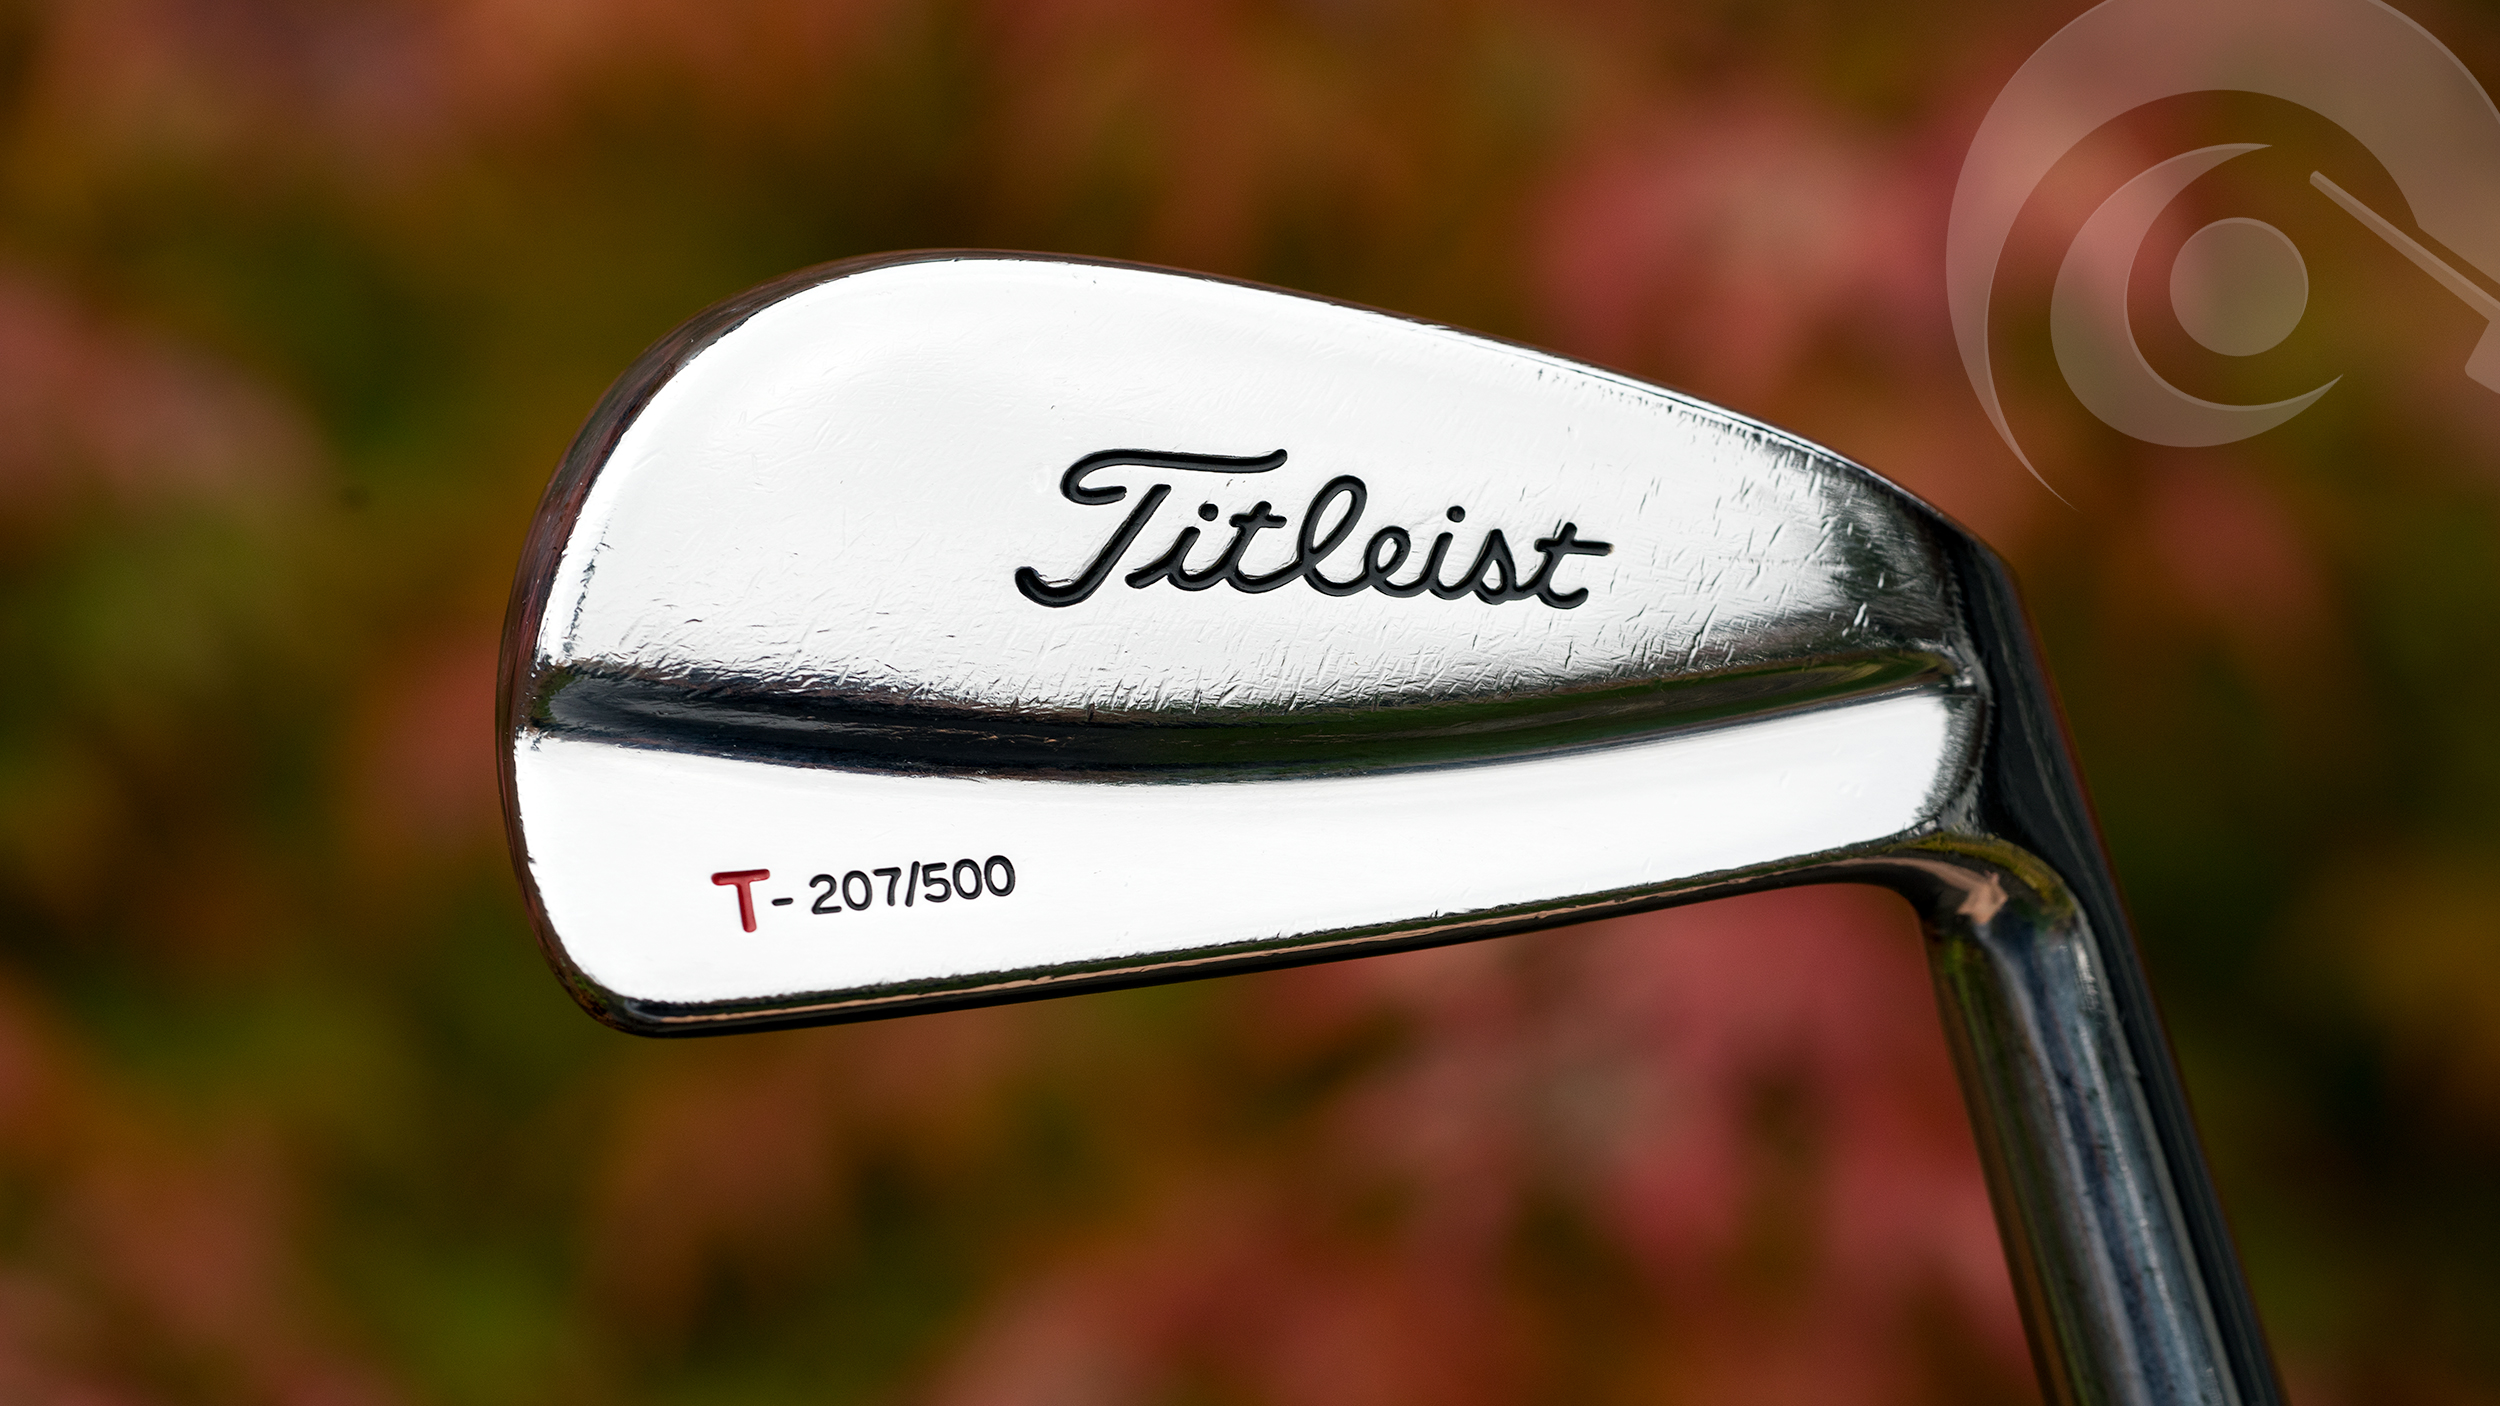 1998 Tiger Woods Replica Irons Made By Miura For Titleist Tourspecgolf Golf Blog